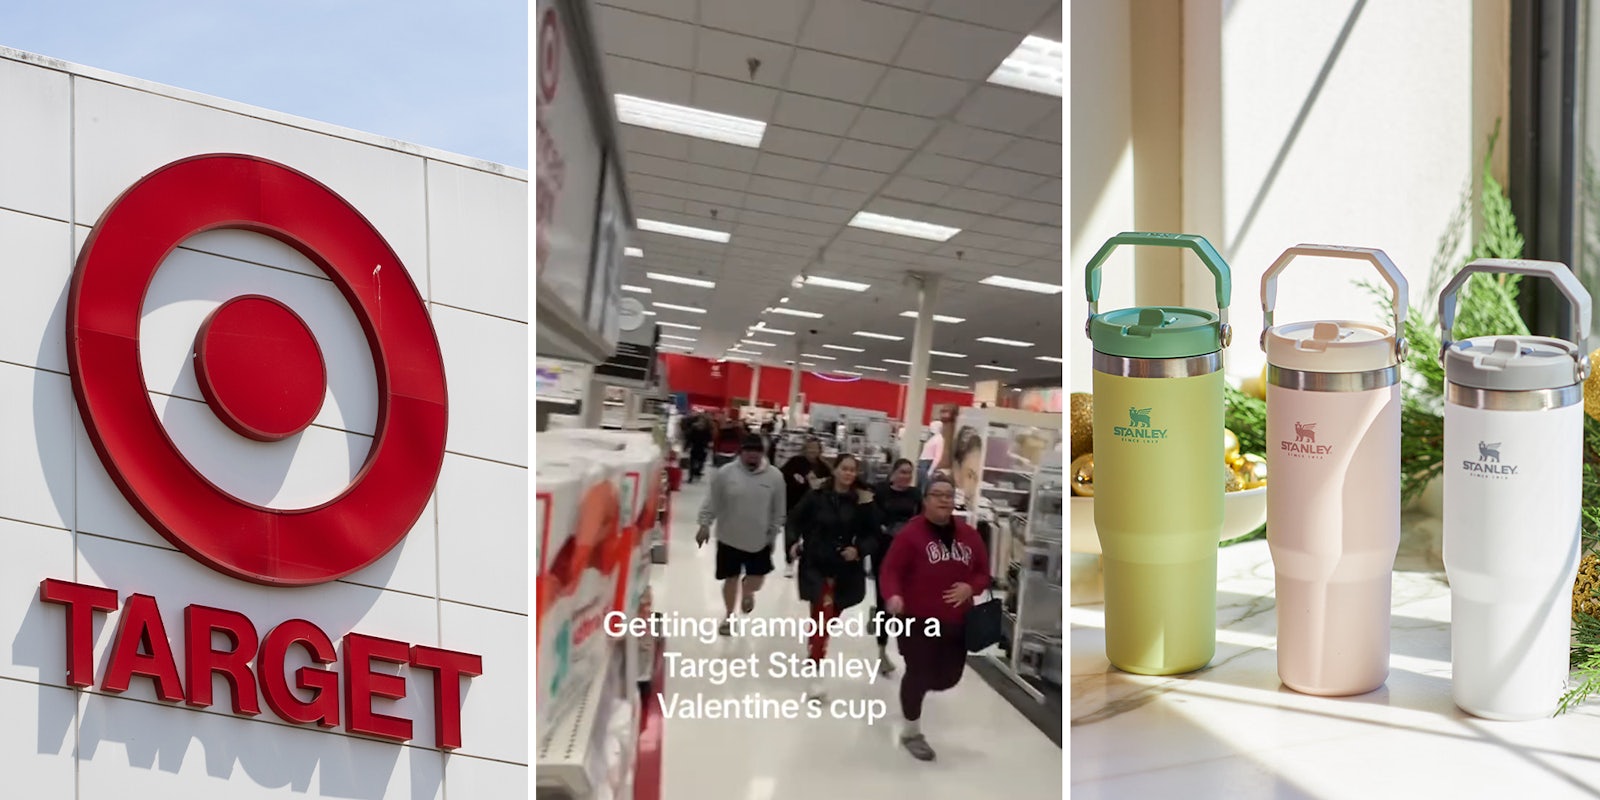 Target shopper says she was trampled by customers who were trying to get to Valentine’s Stanley cups